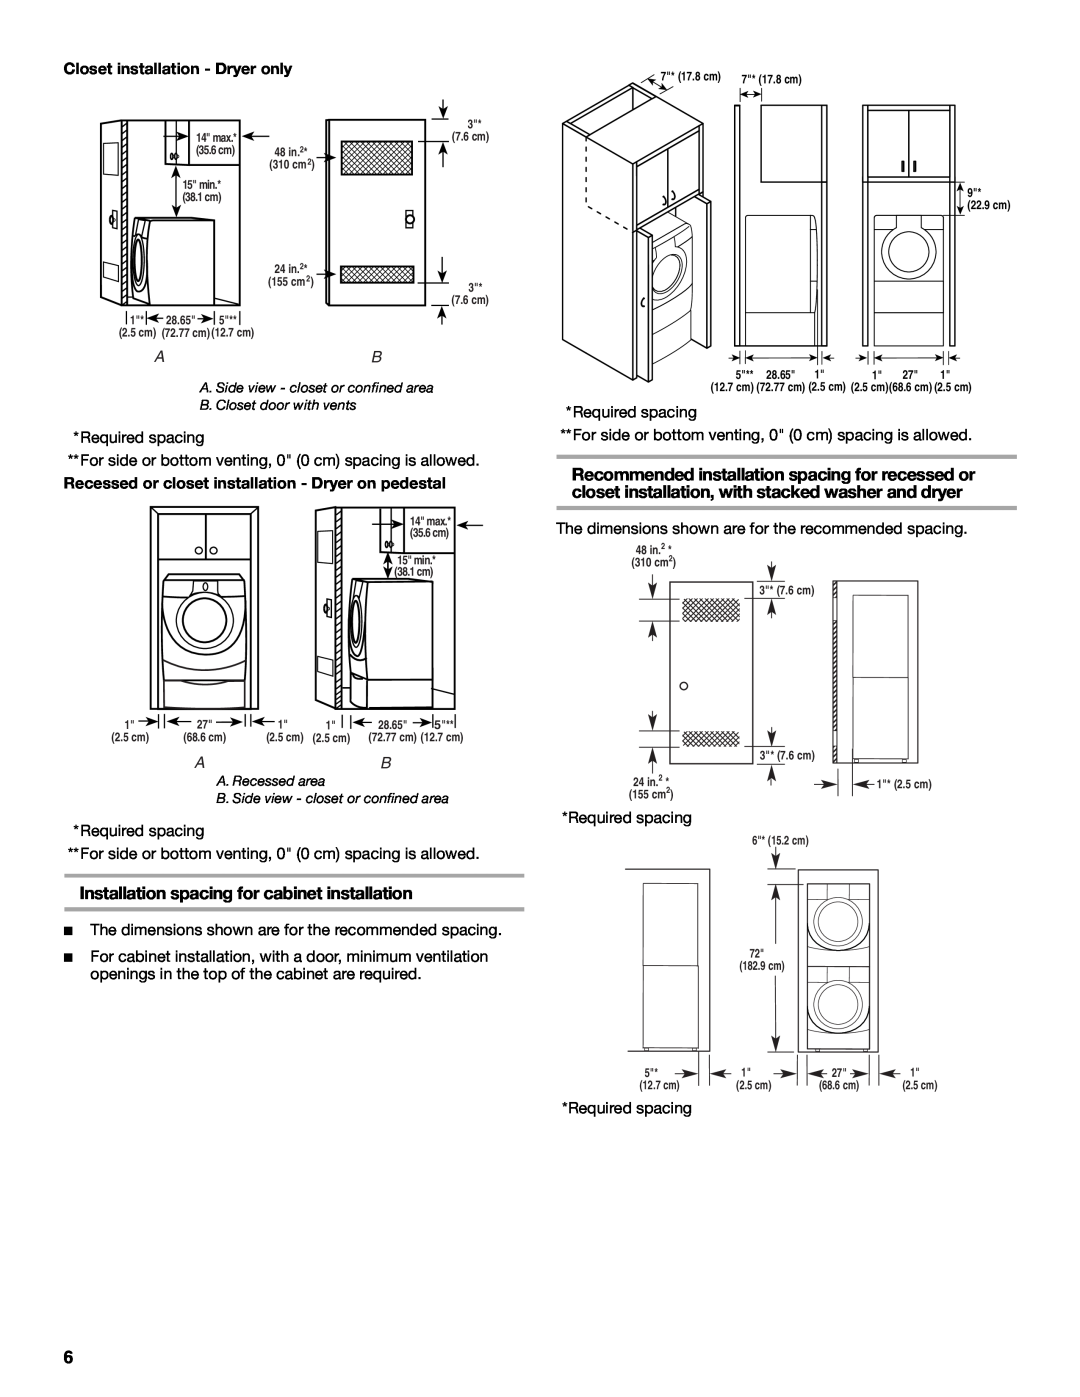 Whirlpool 8578901 Installation spacing for cabinet installation, The dimensions shown are for the recommended spacing 